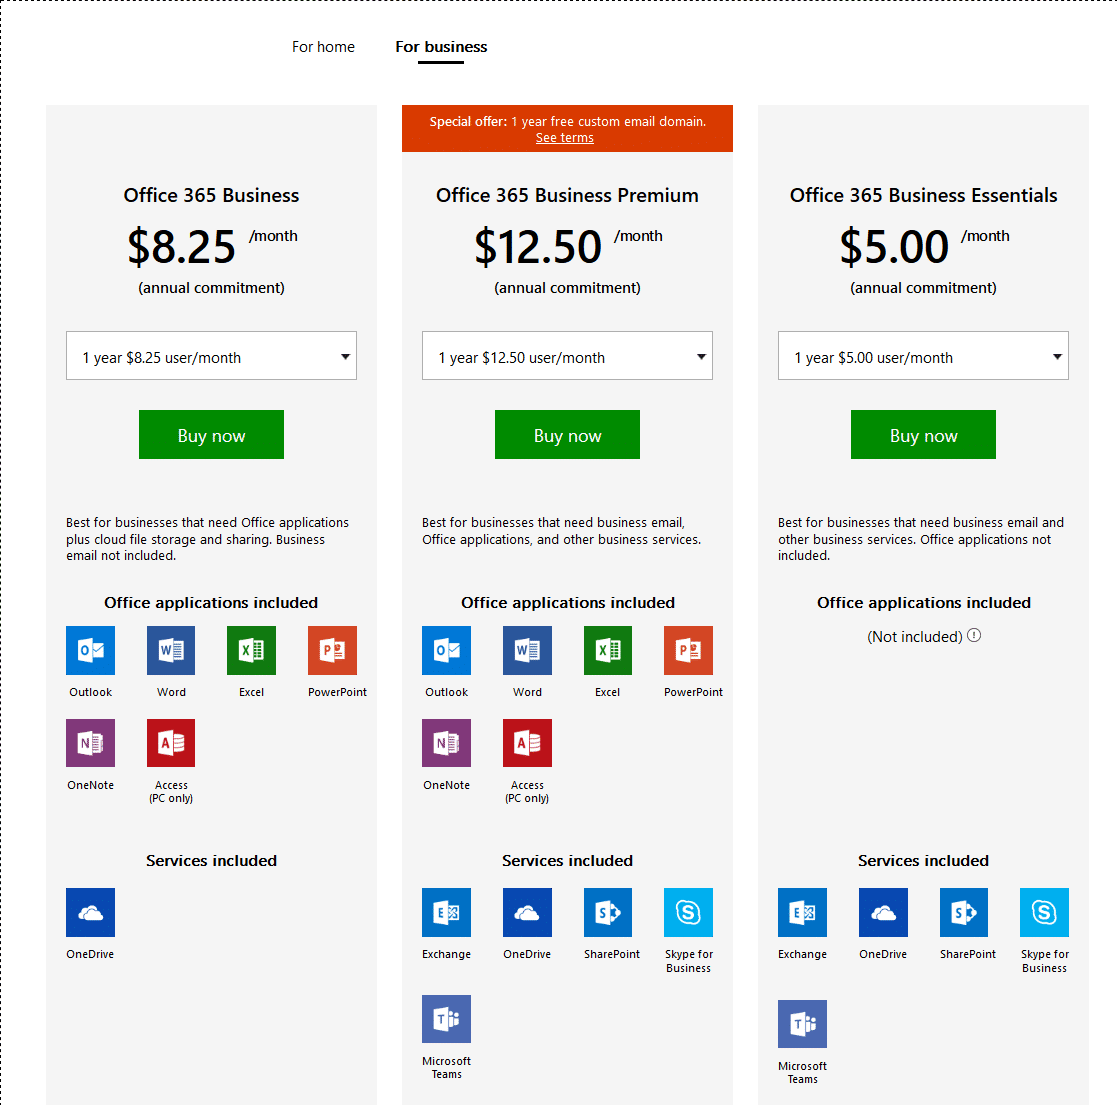 Office 365 pricing